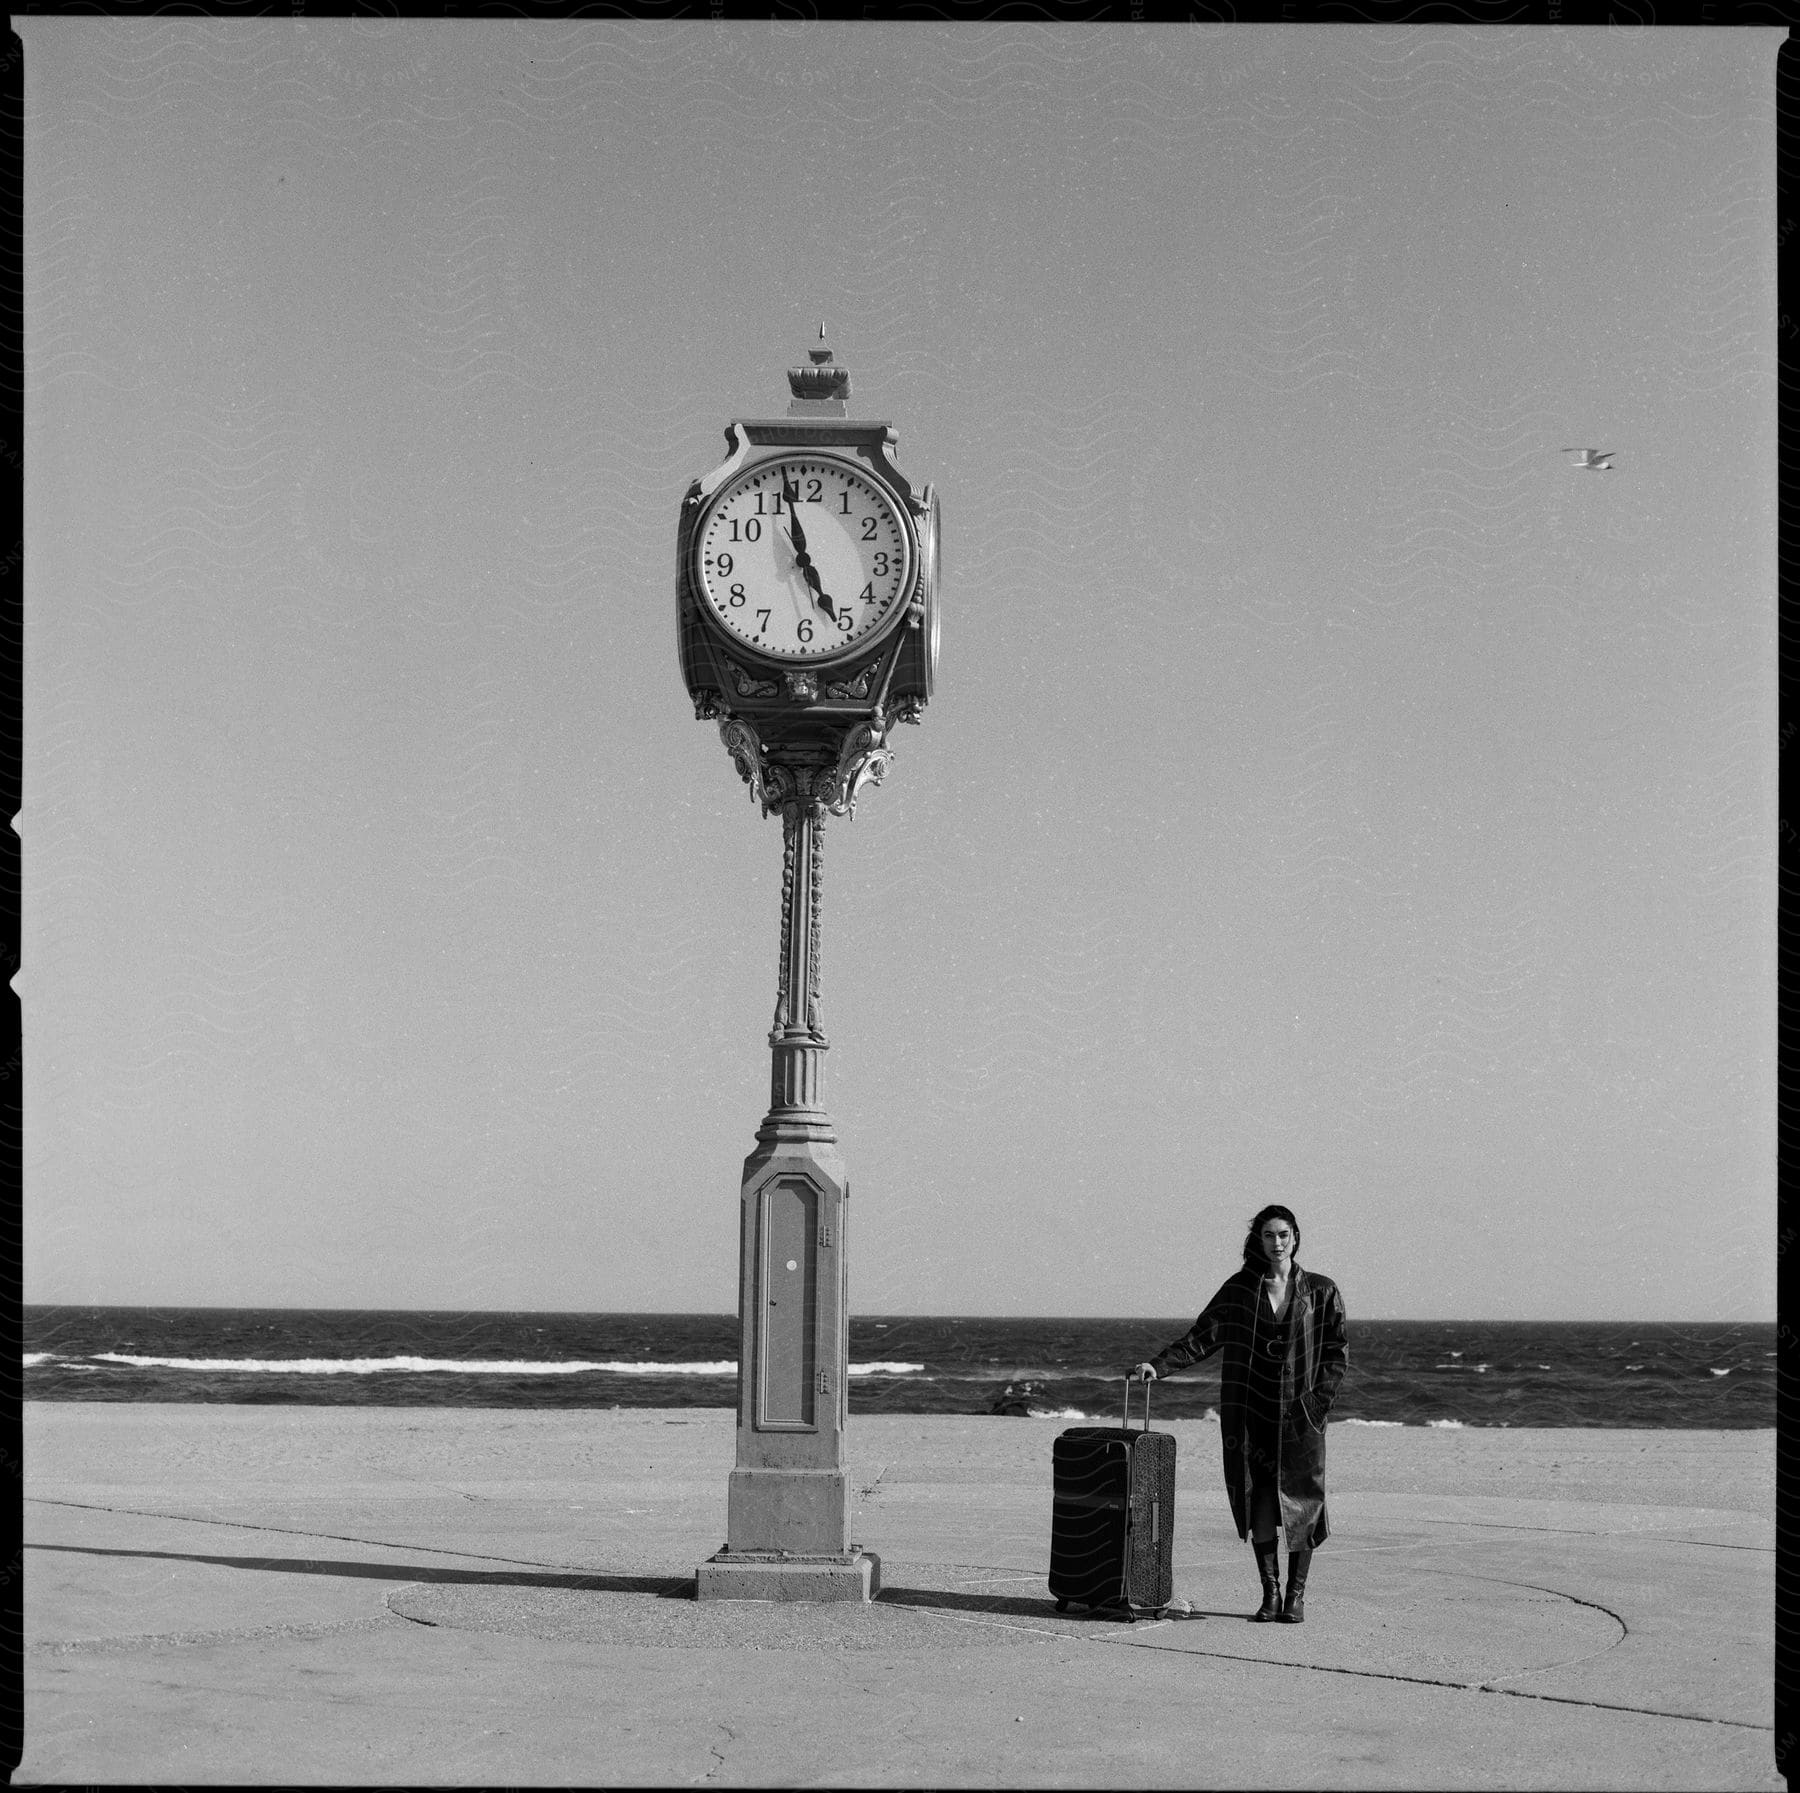 Stock photo of a woman in a trench coat with a suitcase near a clock on the beach